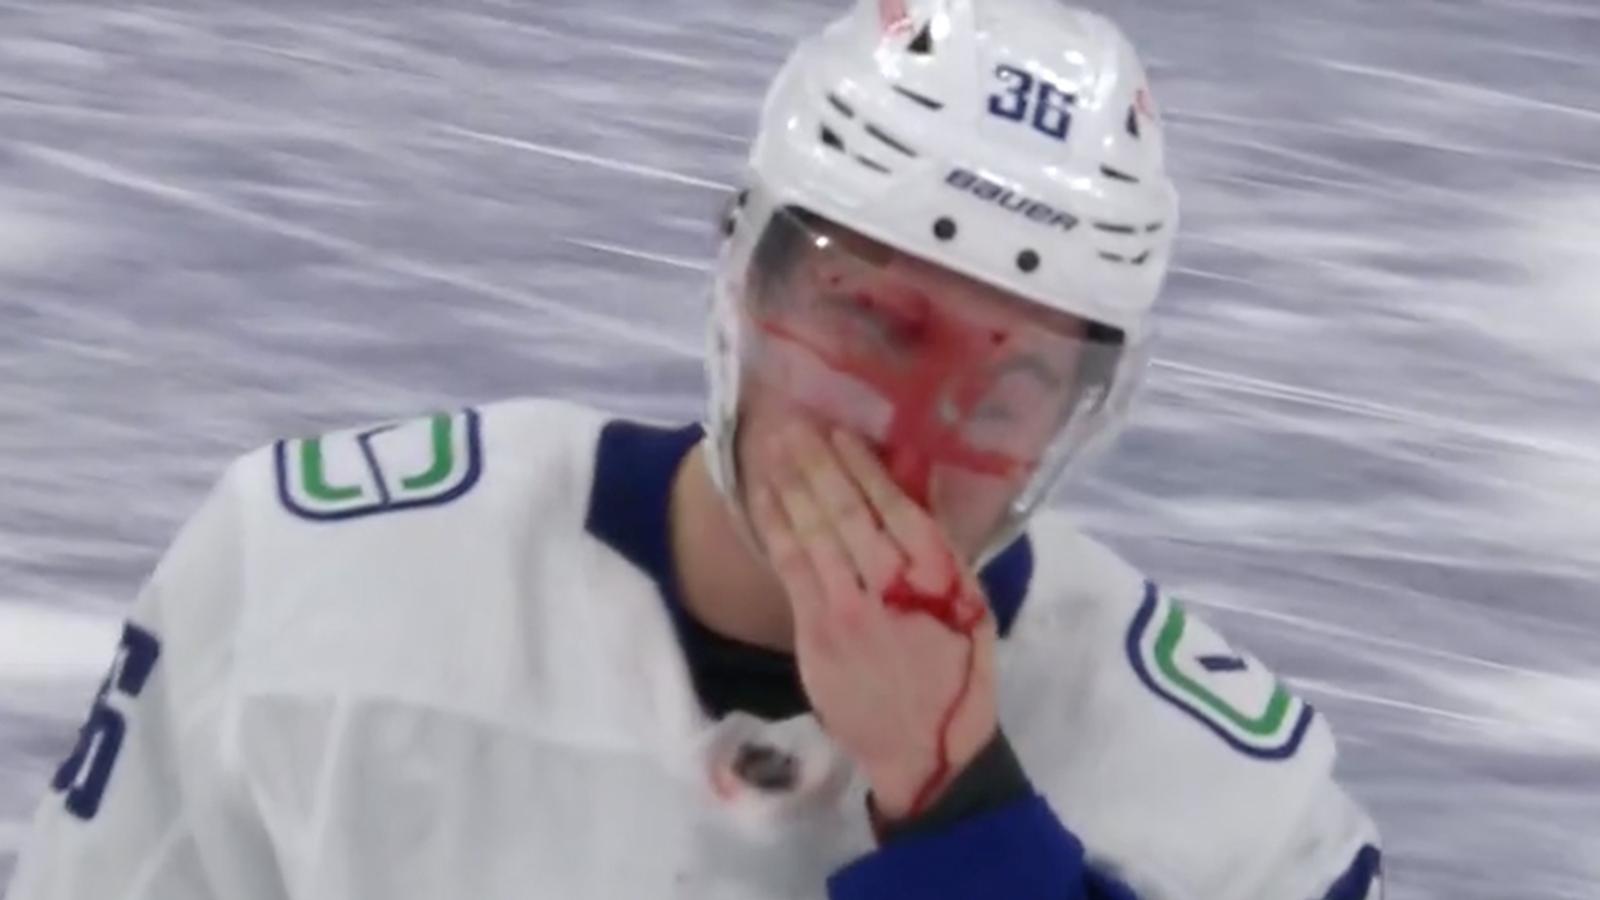 Hoglander takes a slapshot to the face, casually skates off like nothing is wrong